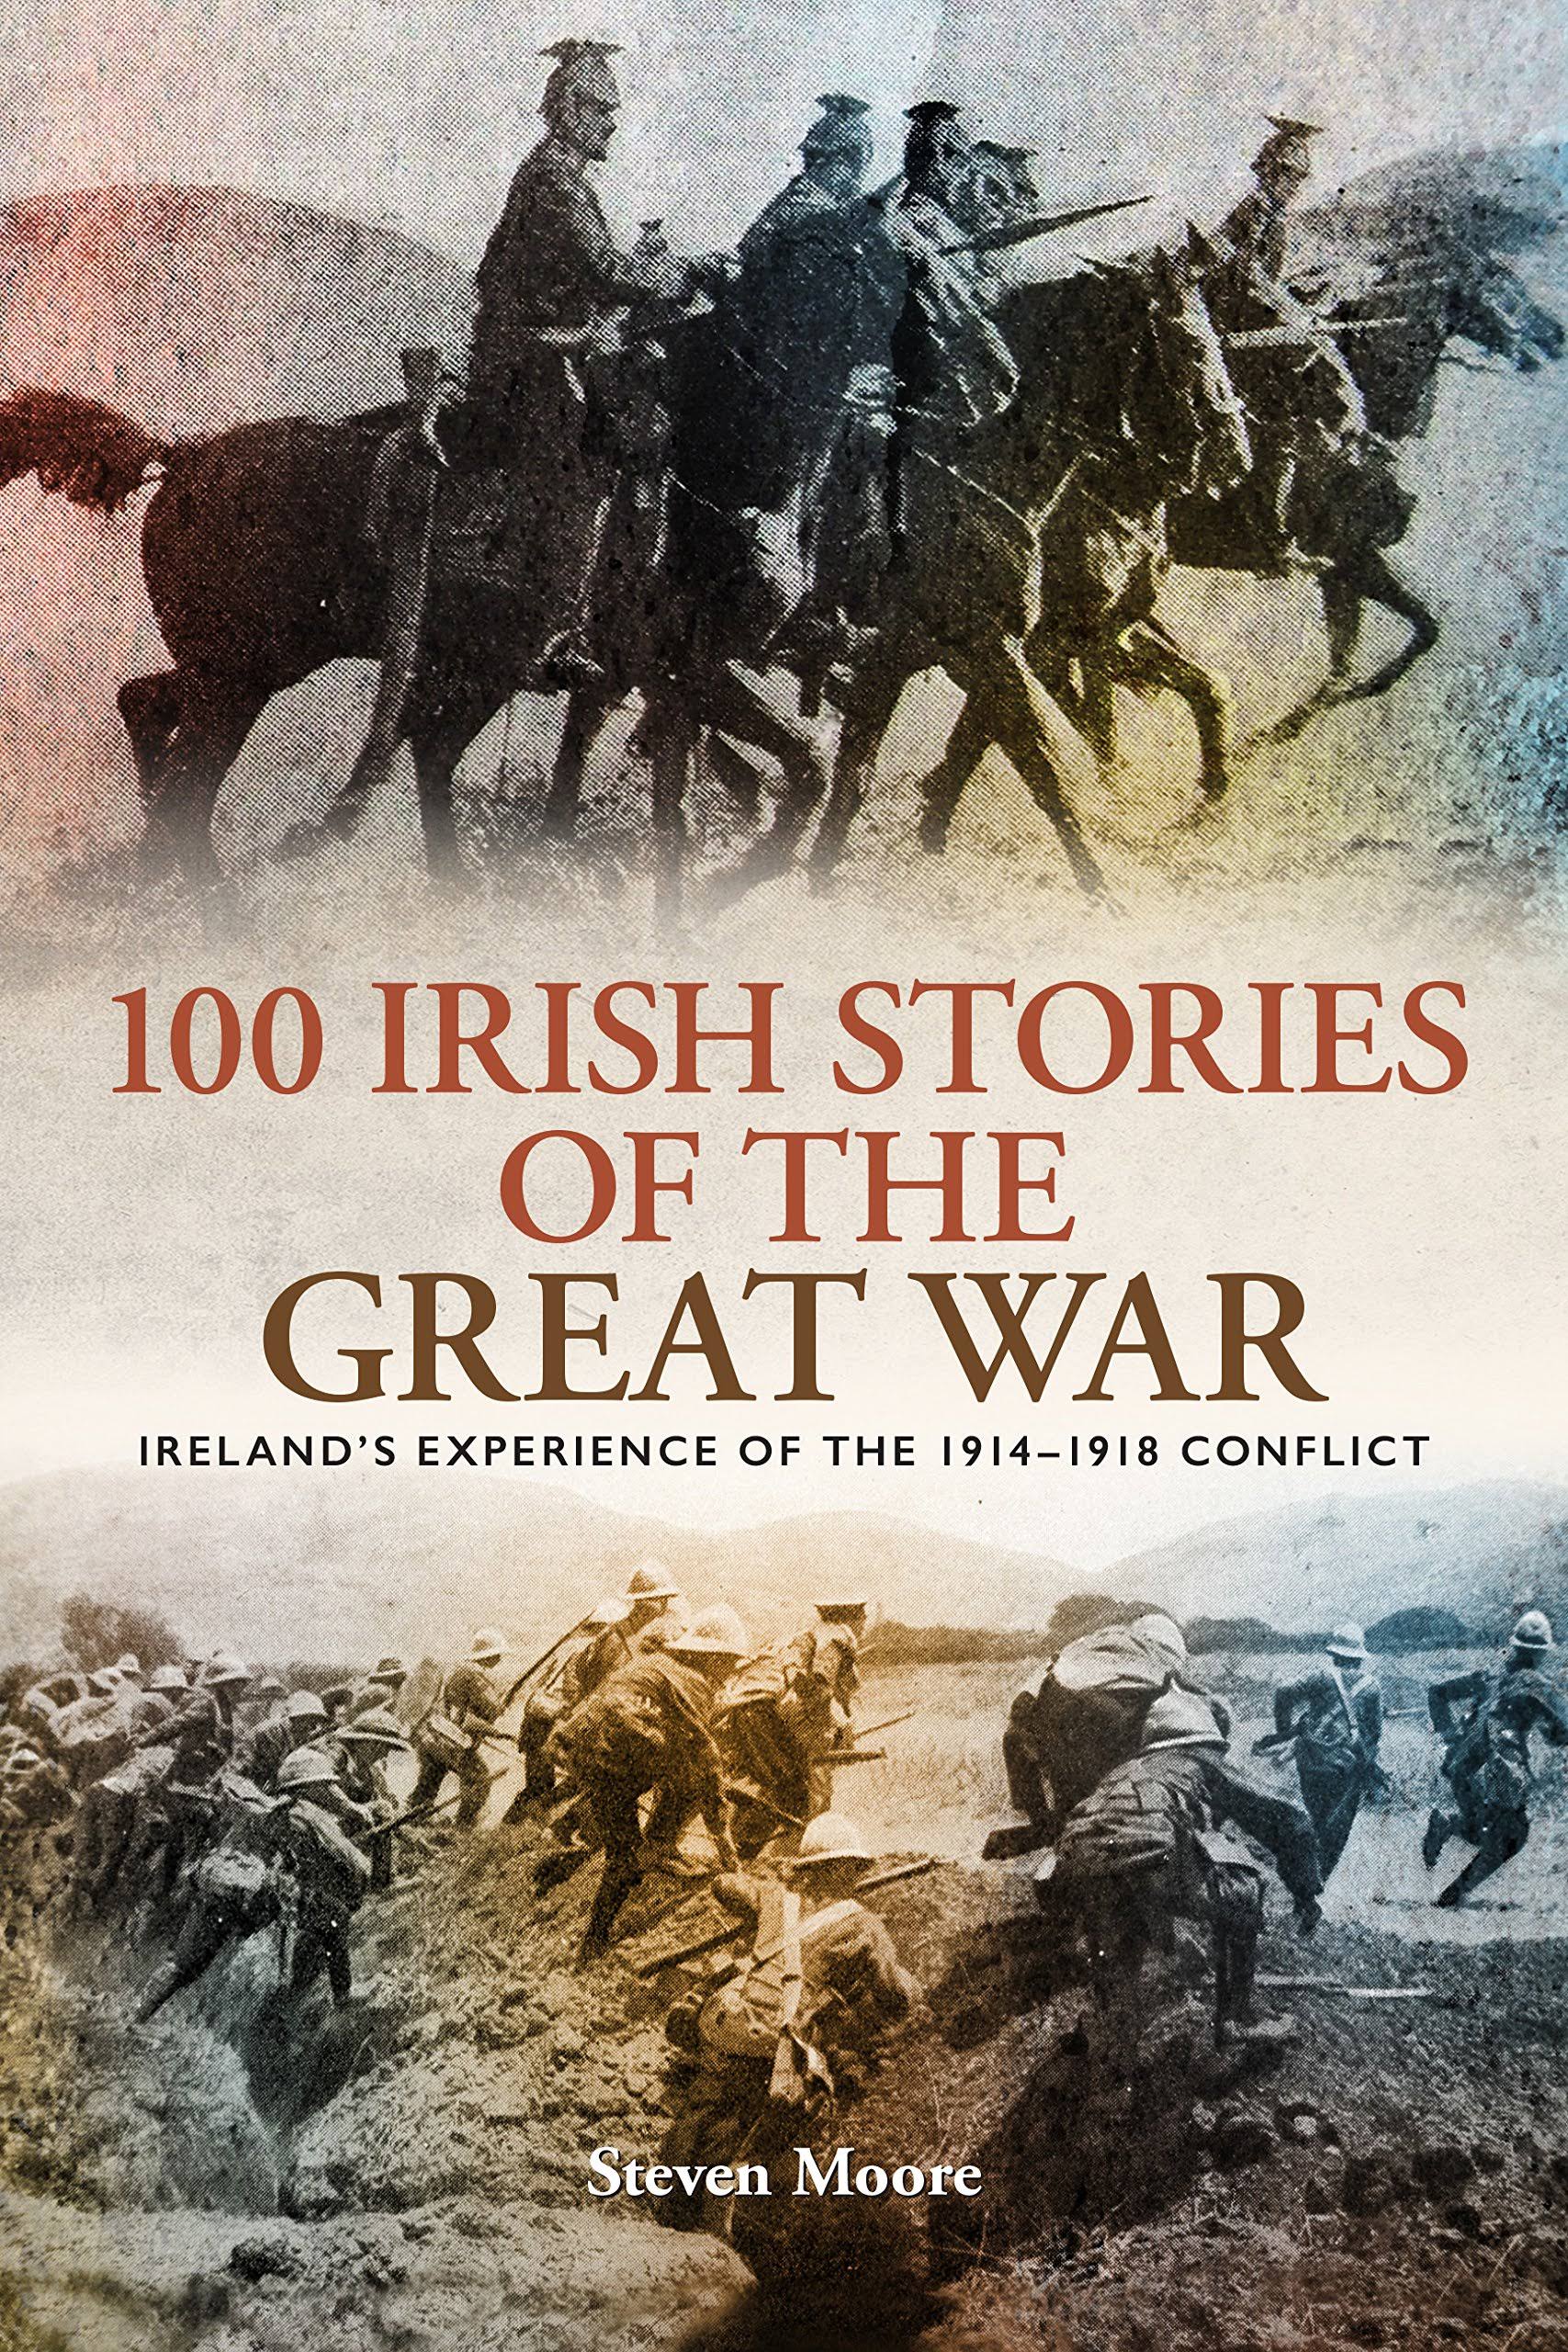 100 Irish Stories of the Great War by Steven Moore